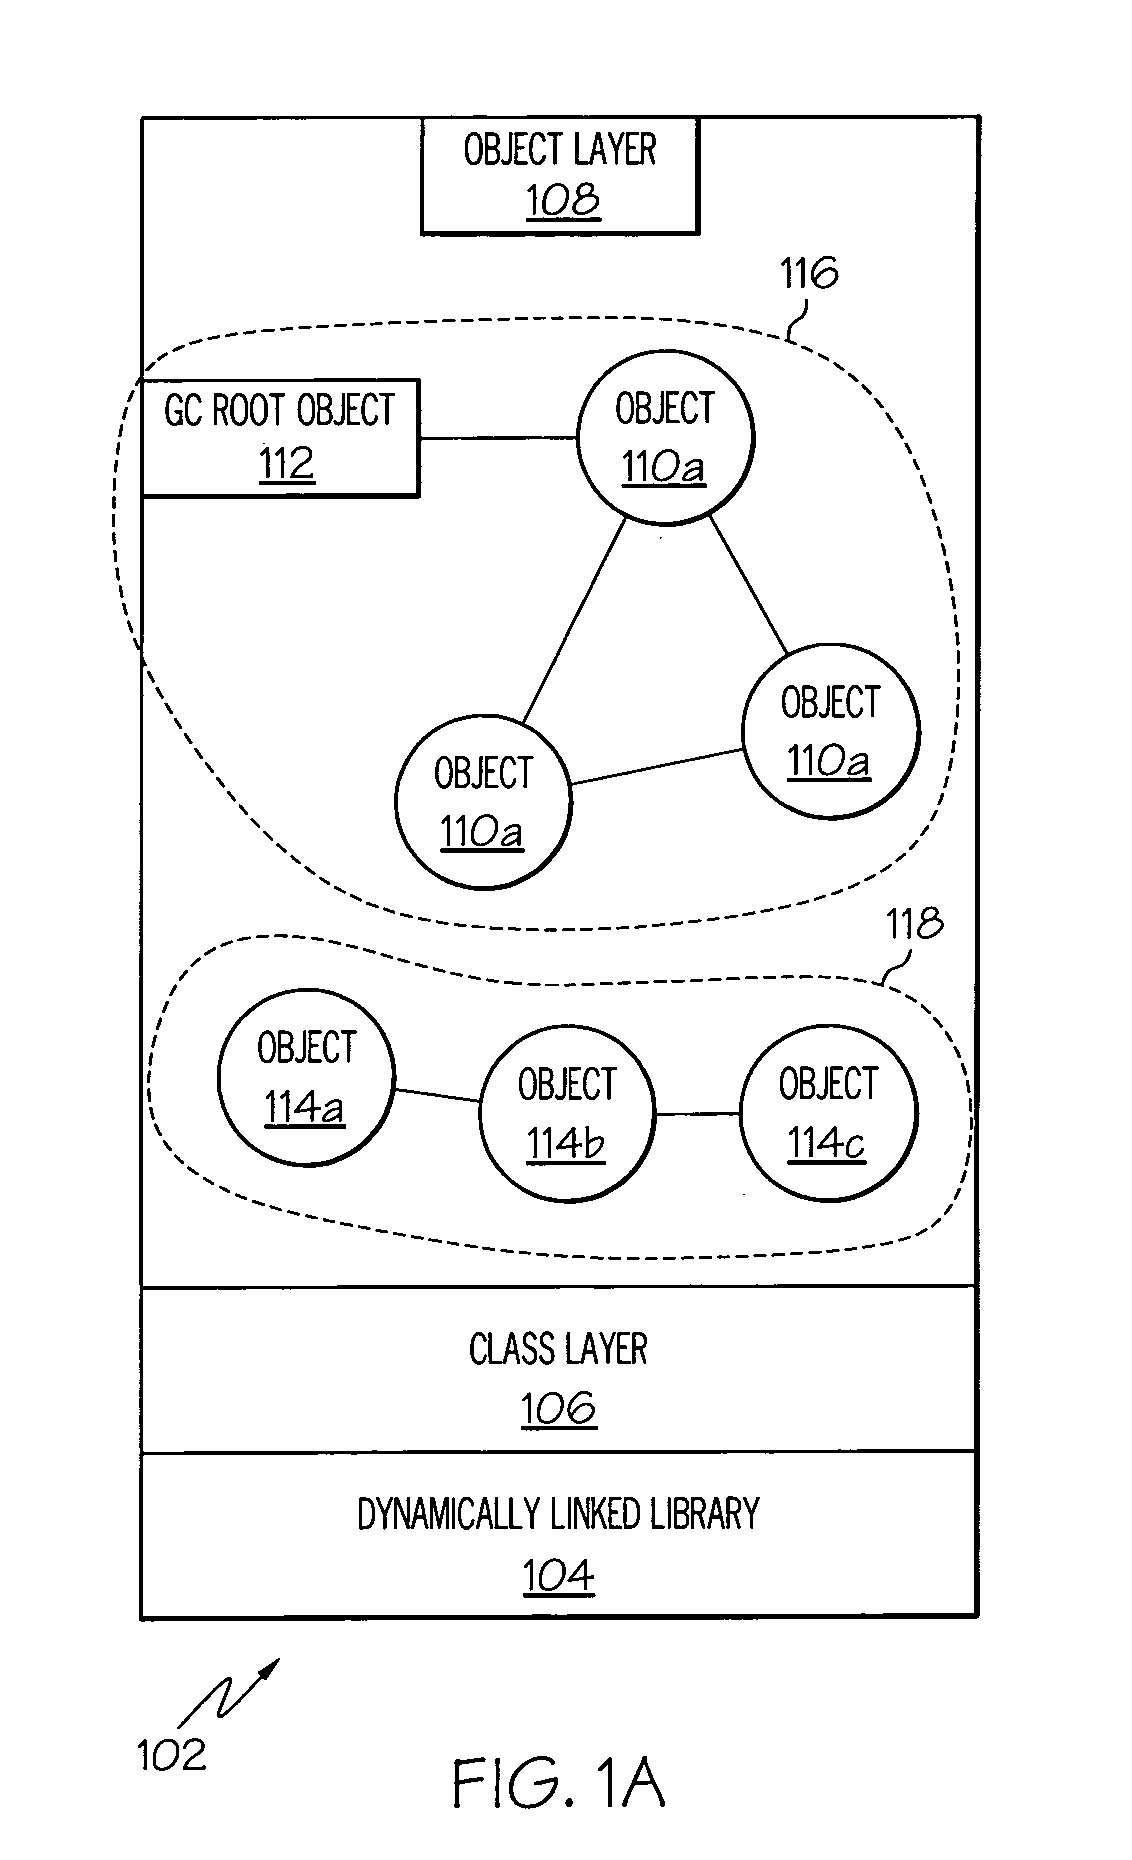 Attributing memory usage by individual software components